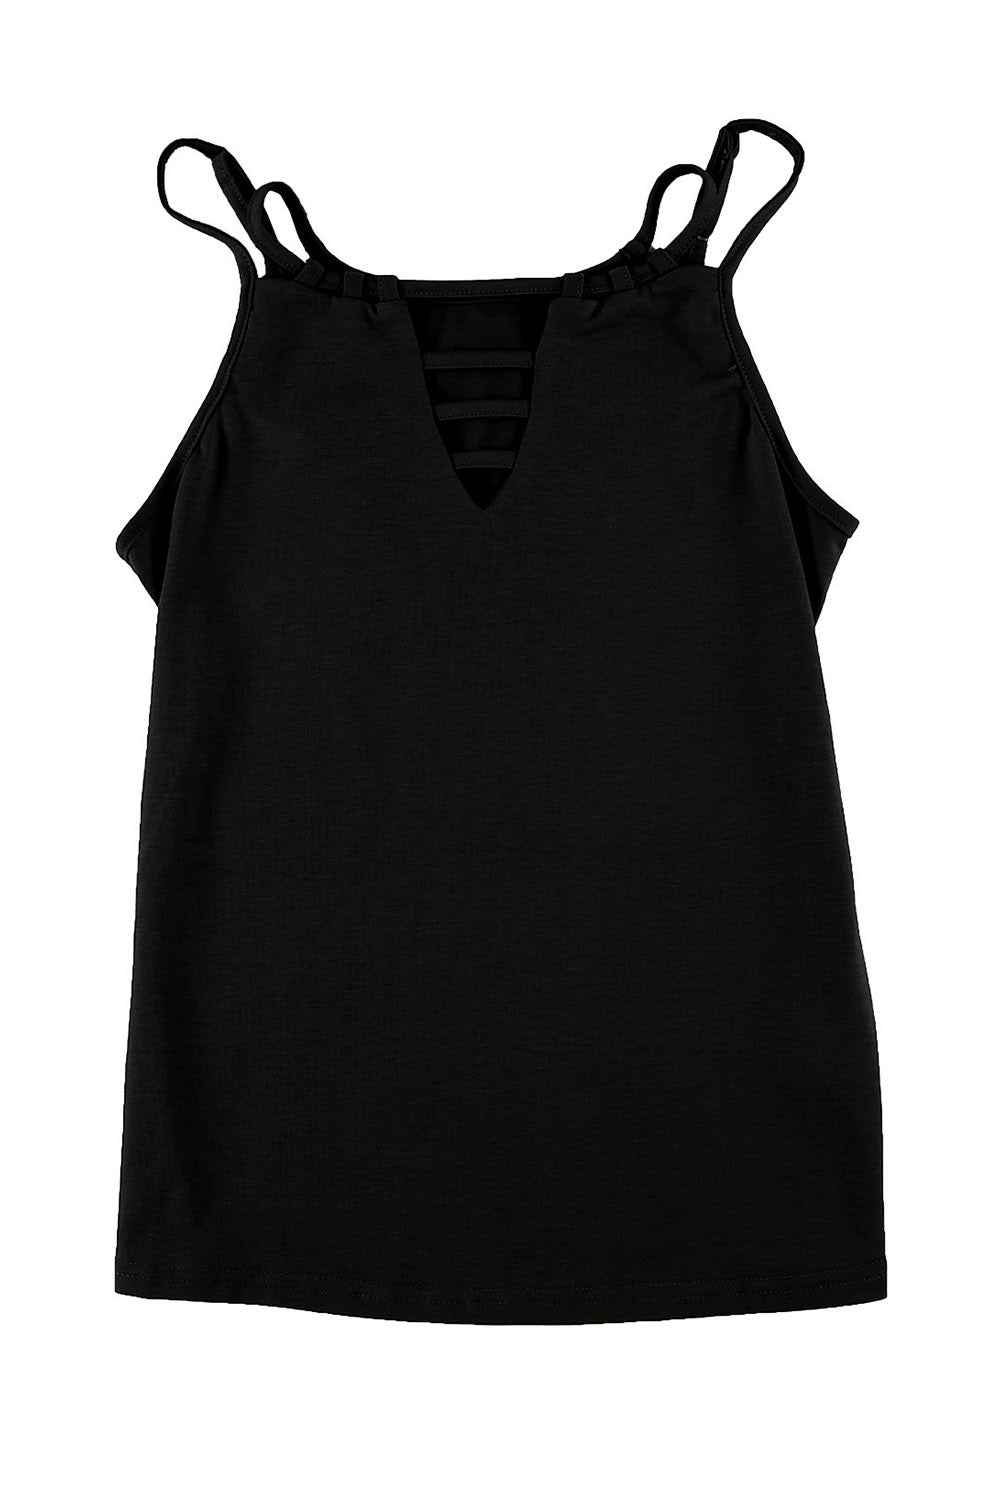 Wine Red Ladder Hollow out Tank Top